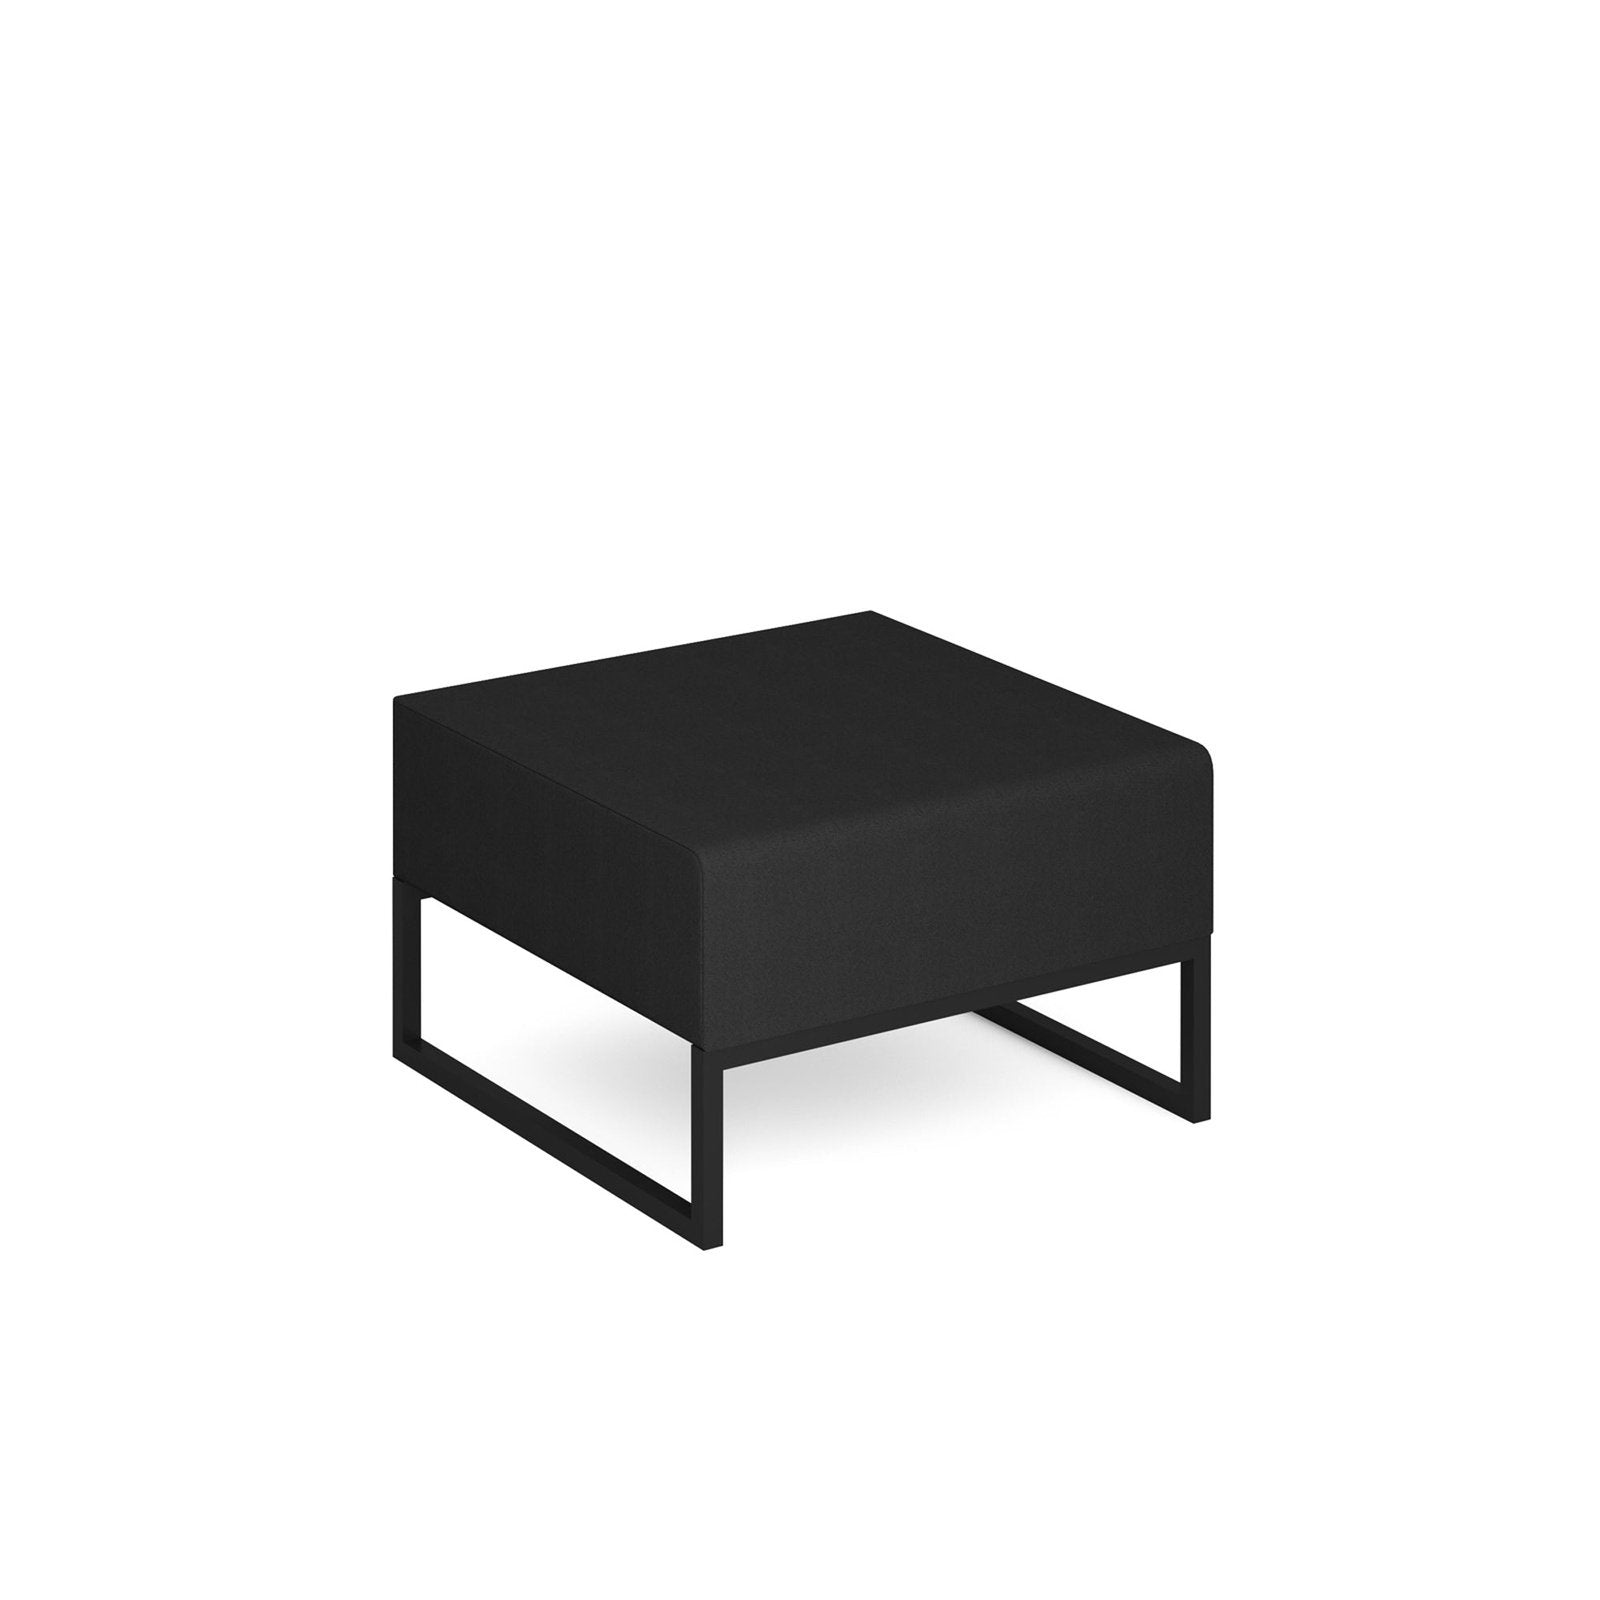 Nera modular soft seating single bench with black frame - Office Products Online